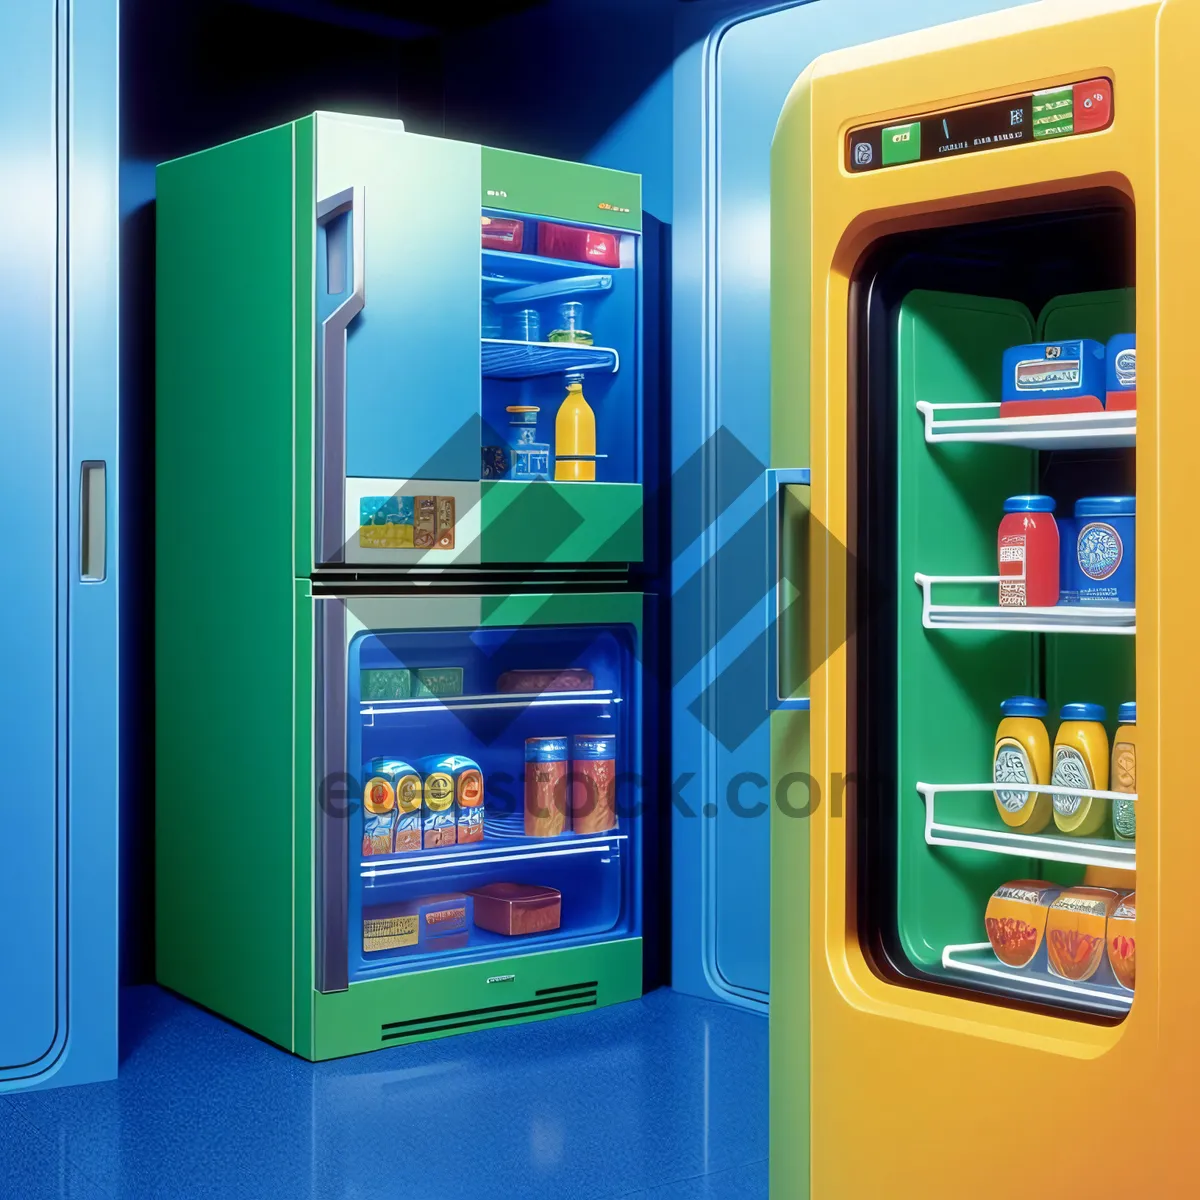 Picture of Modern Vending Machine in Restaurant Building